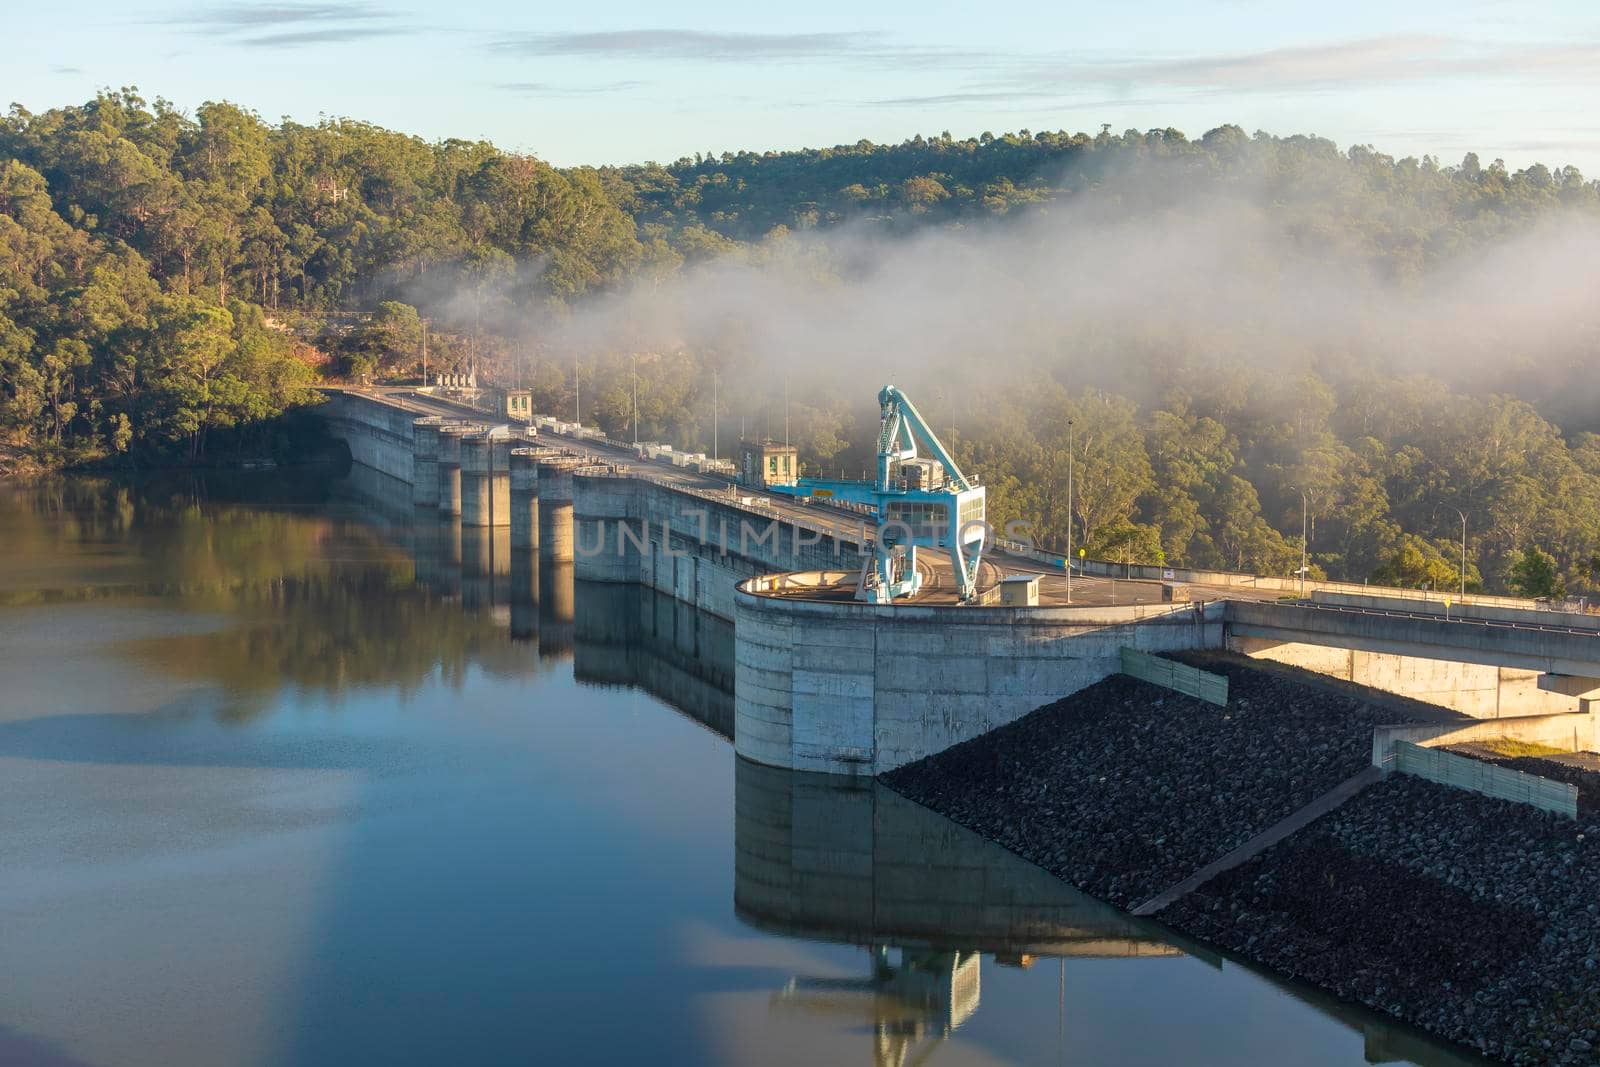 The Dam wall and flood gates of a large fresh water reservoir in regional Australia